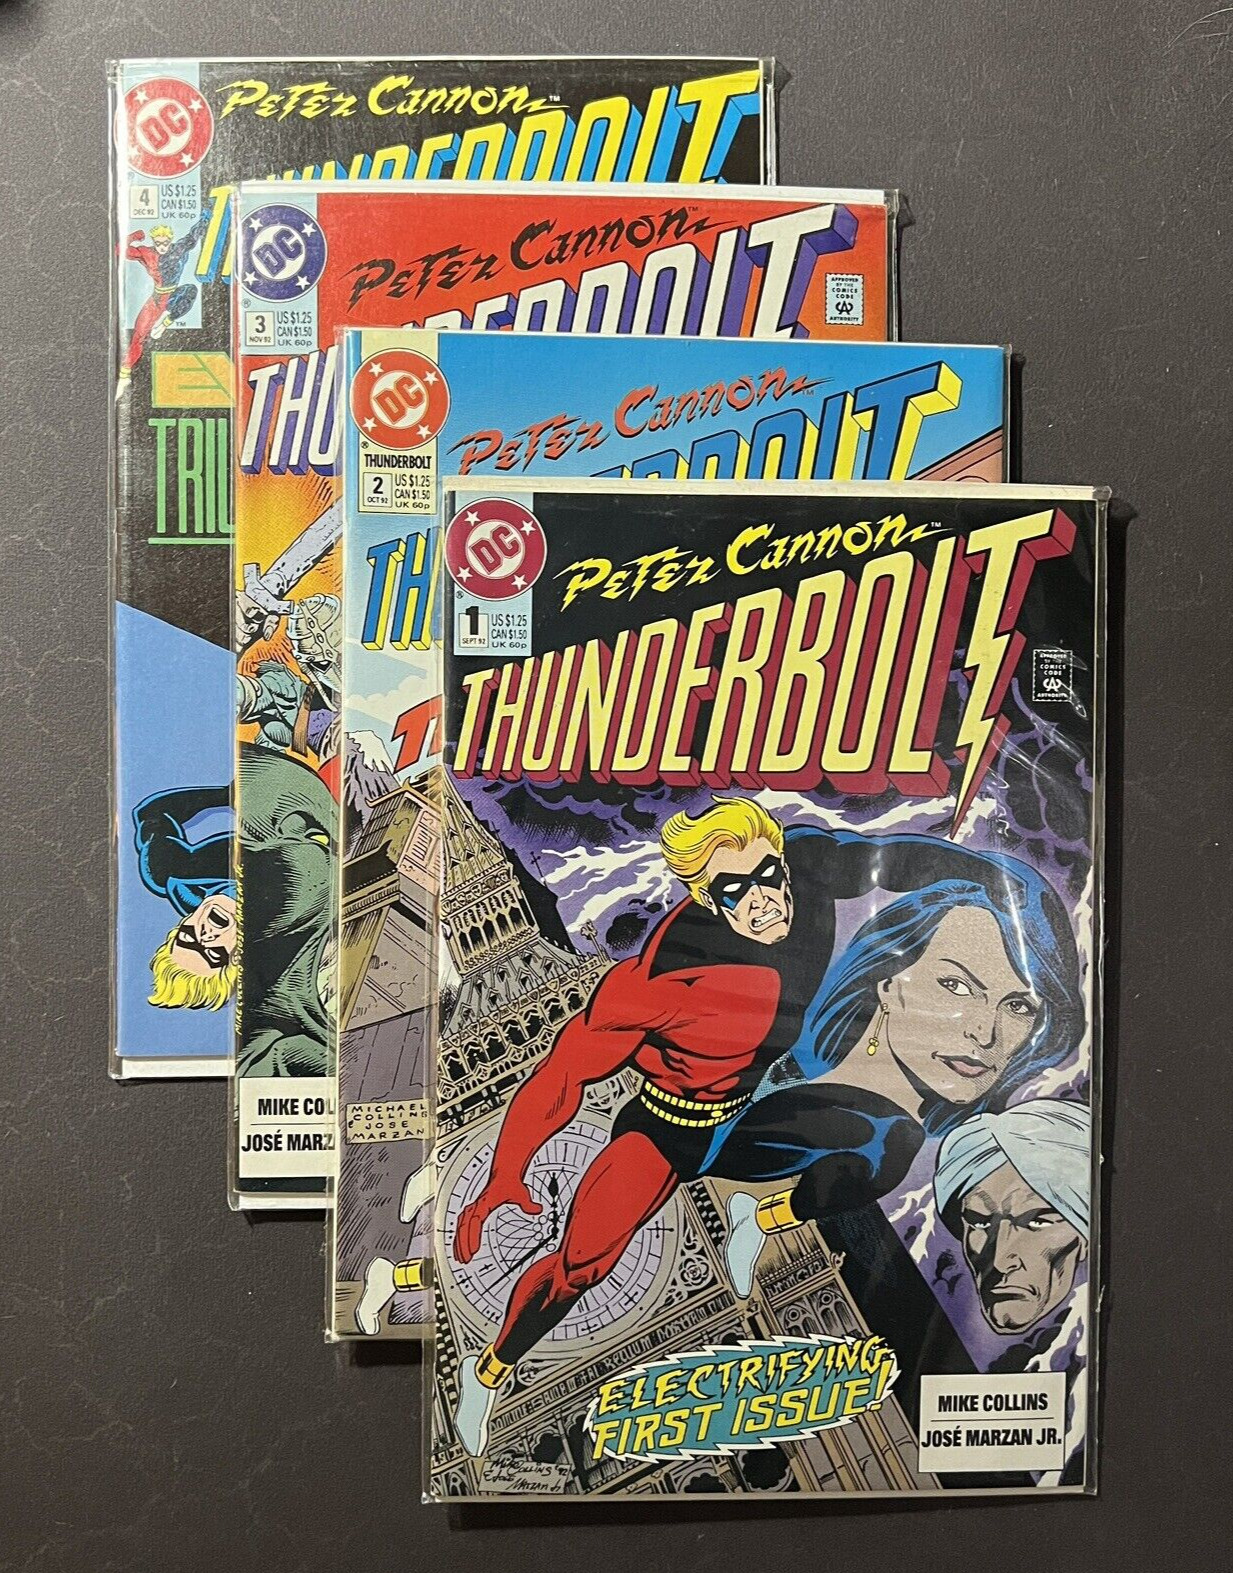 Peter Cannon Thunderbolt Series #1 - 4 DC Comics Modern Age 1992 Lot of 4